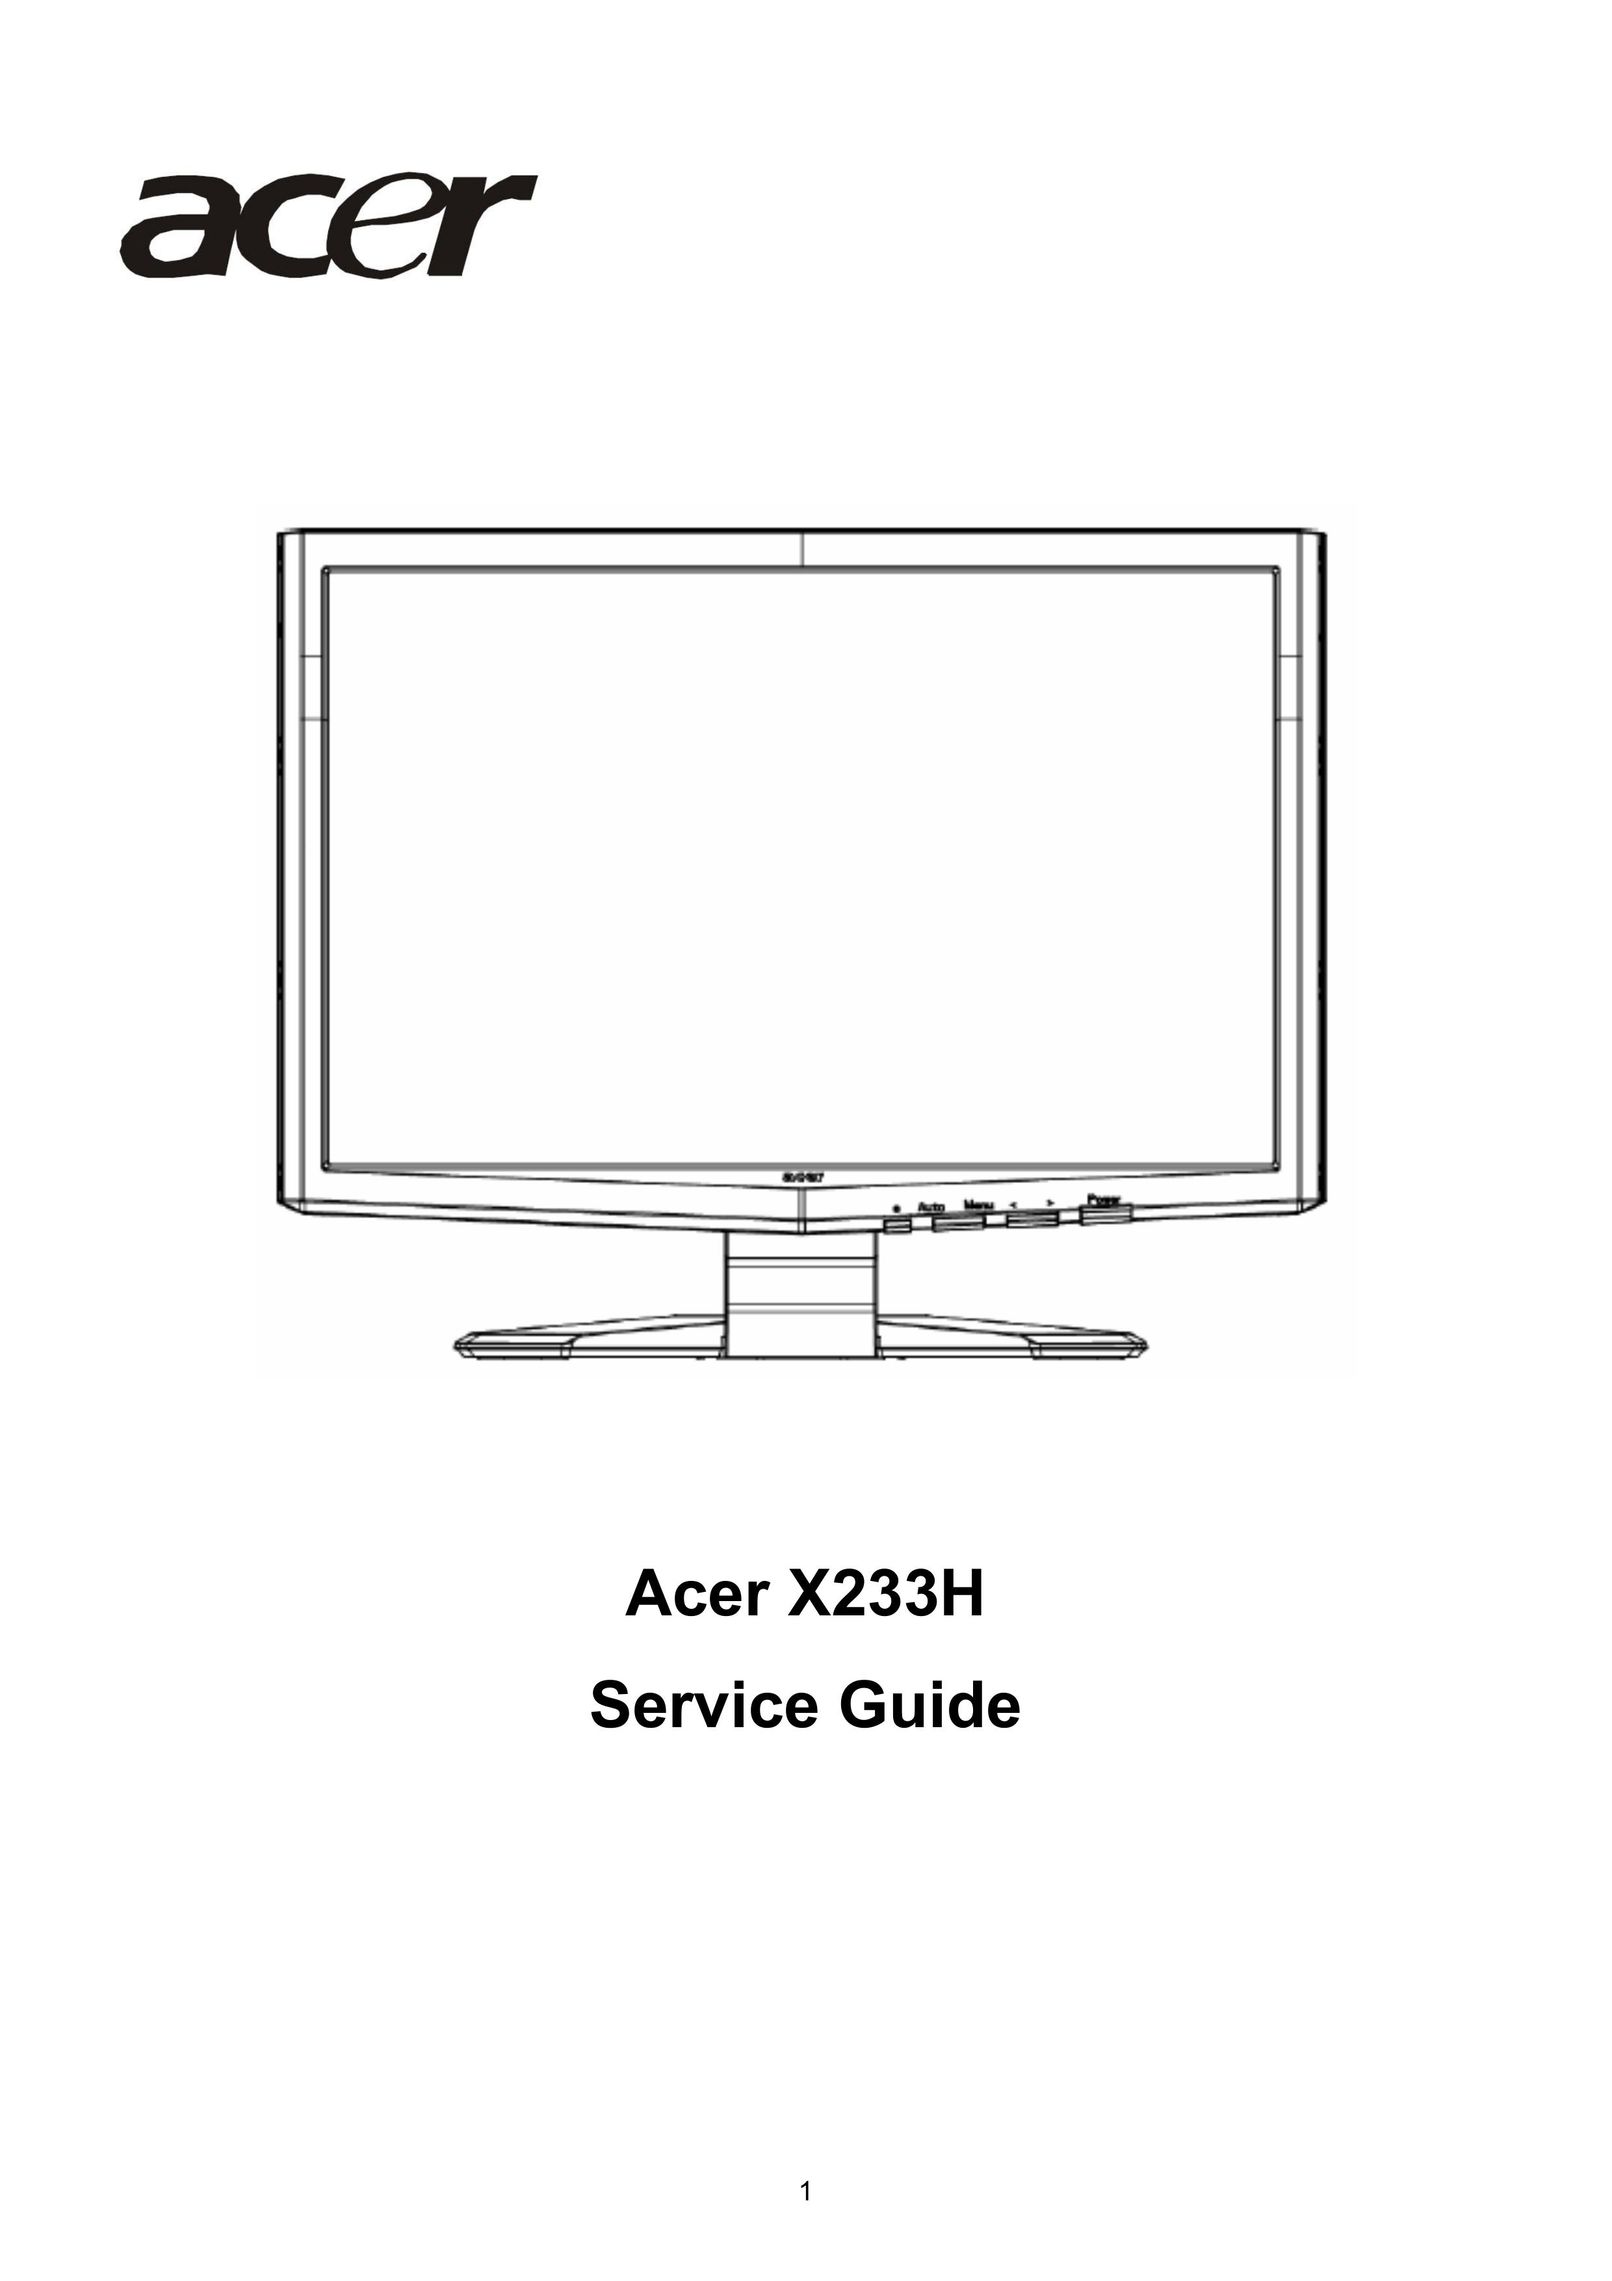 Acer X233H Flat Panel Television User Manual